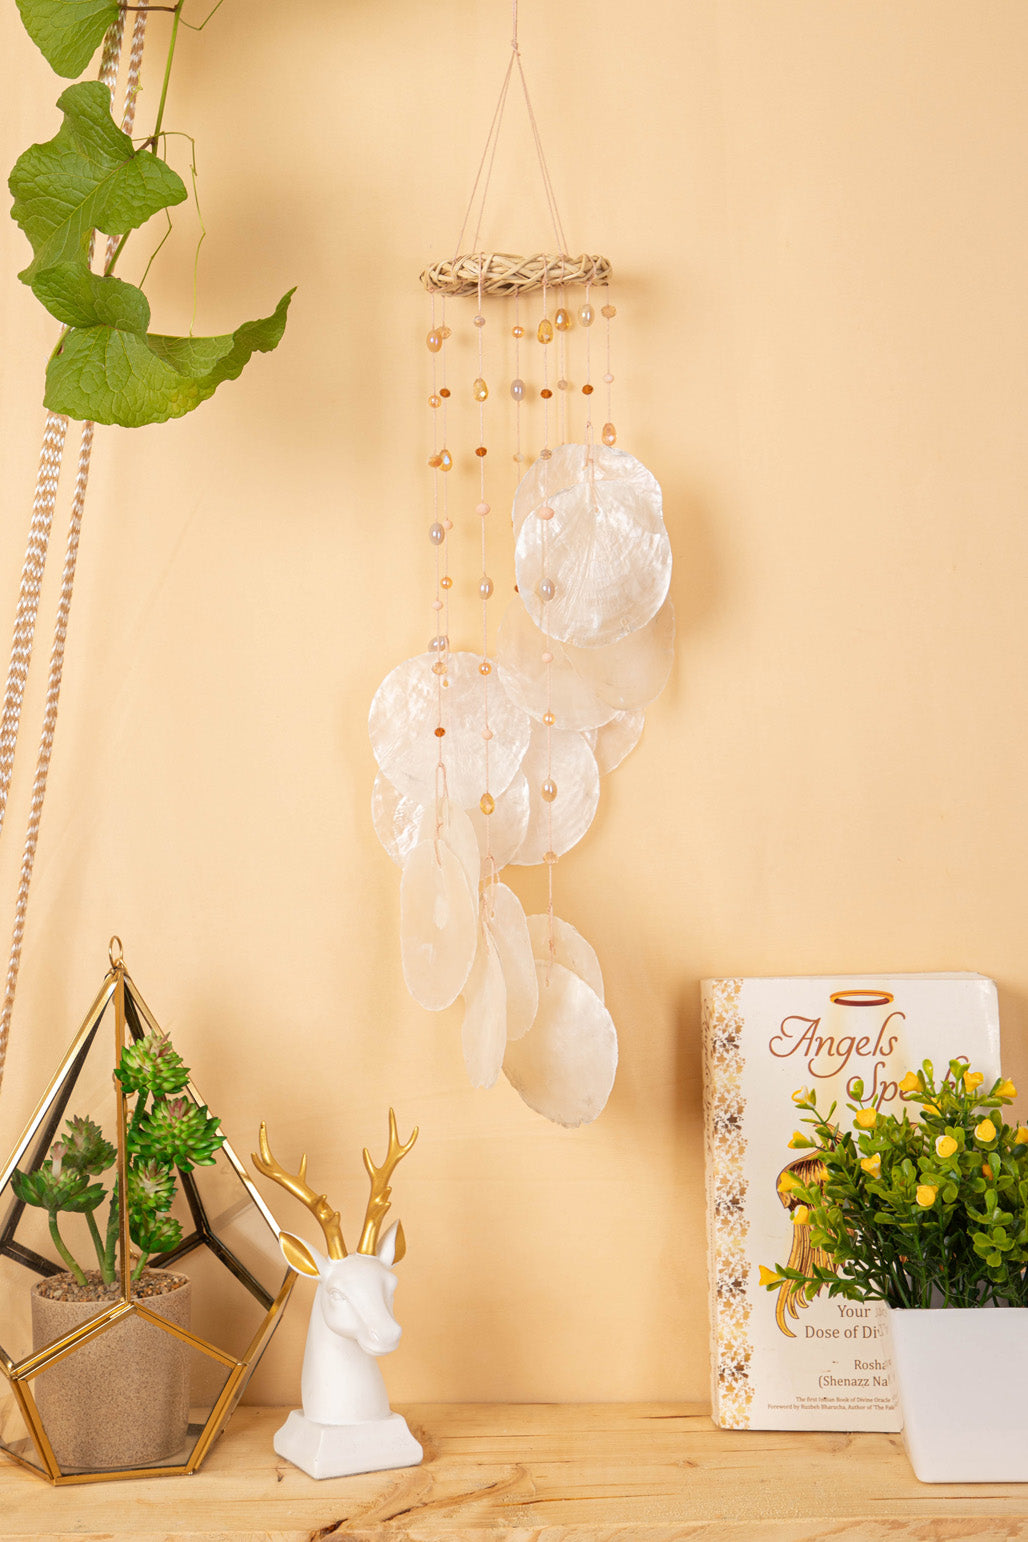 Capiz Shell Spiral Chime - Spring Meadow - Alternatives Global Marketplace